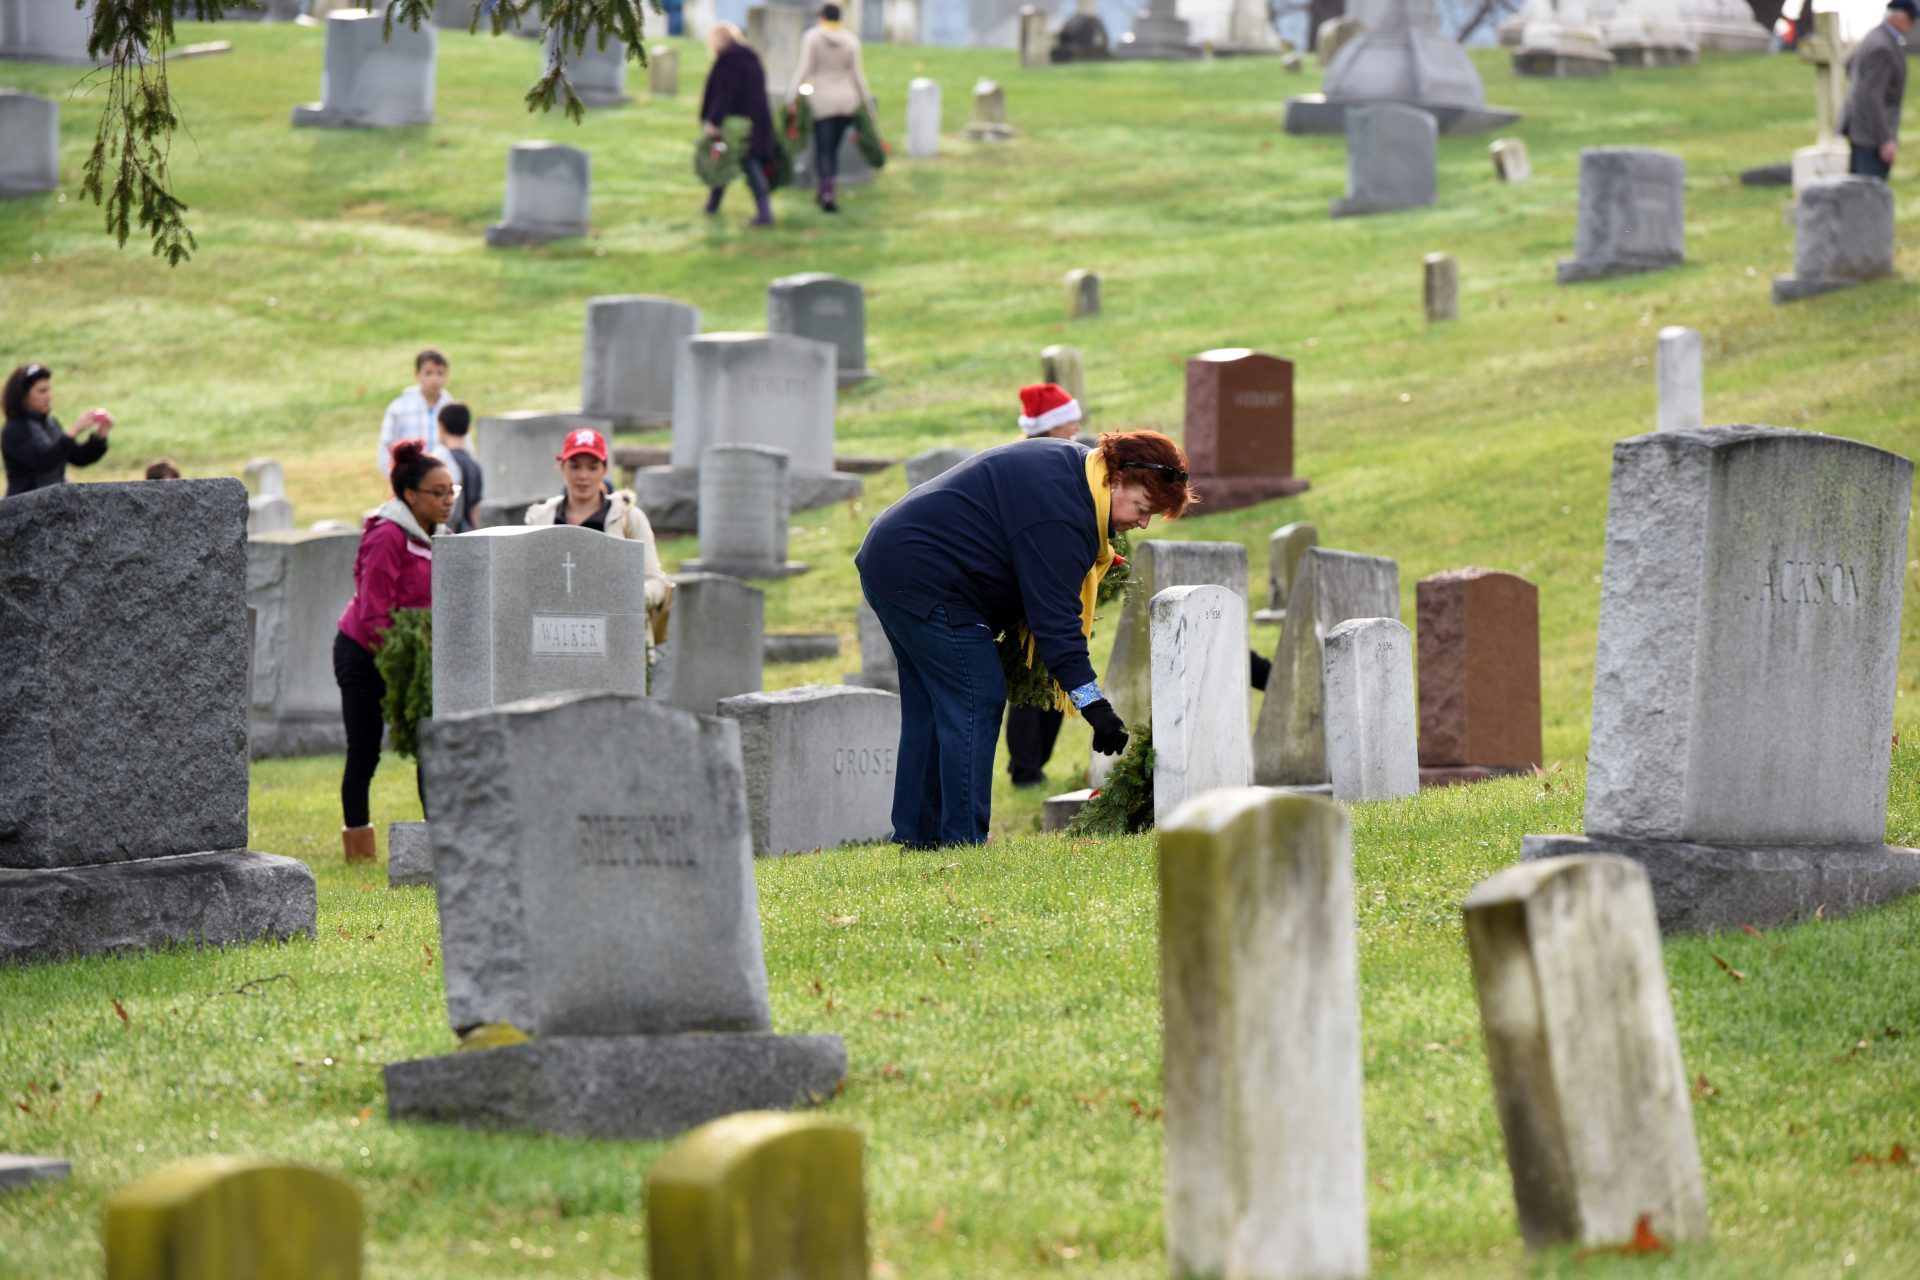 Traditional burials create a ridiculous amount of waster